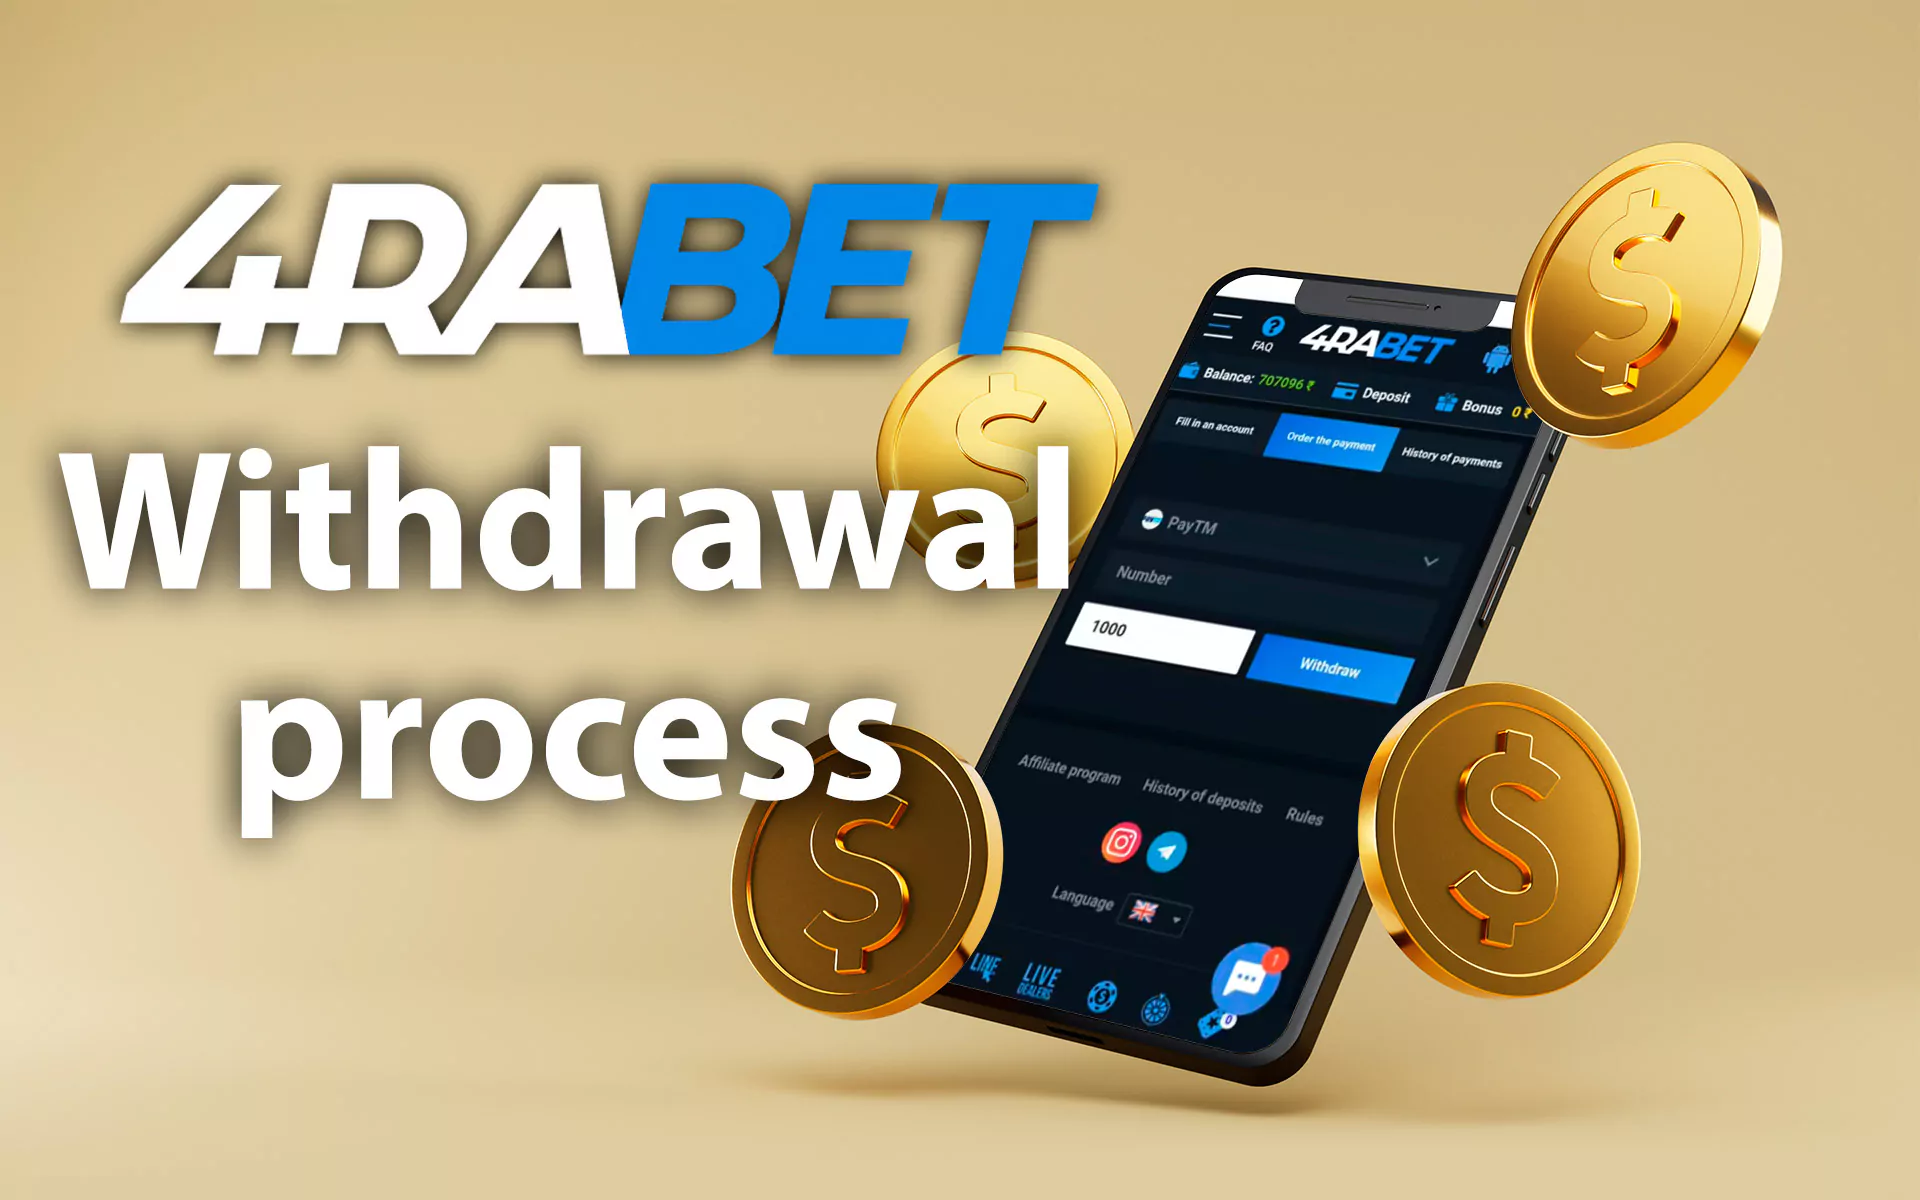 You can easily withdraw your winnings via both browser and mobile versions.